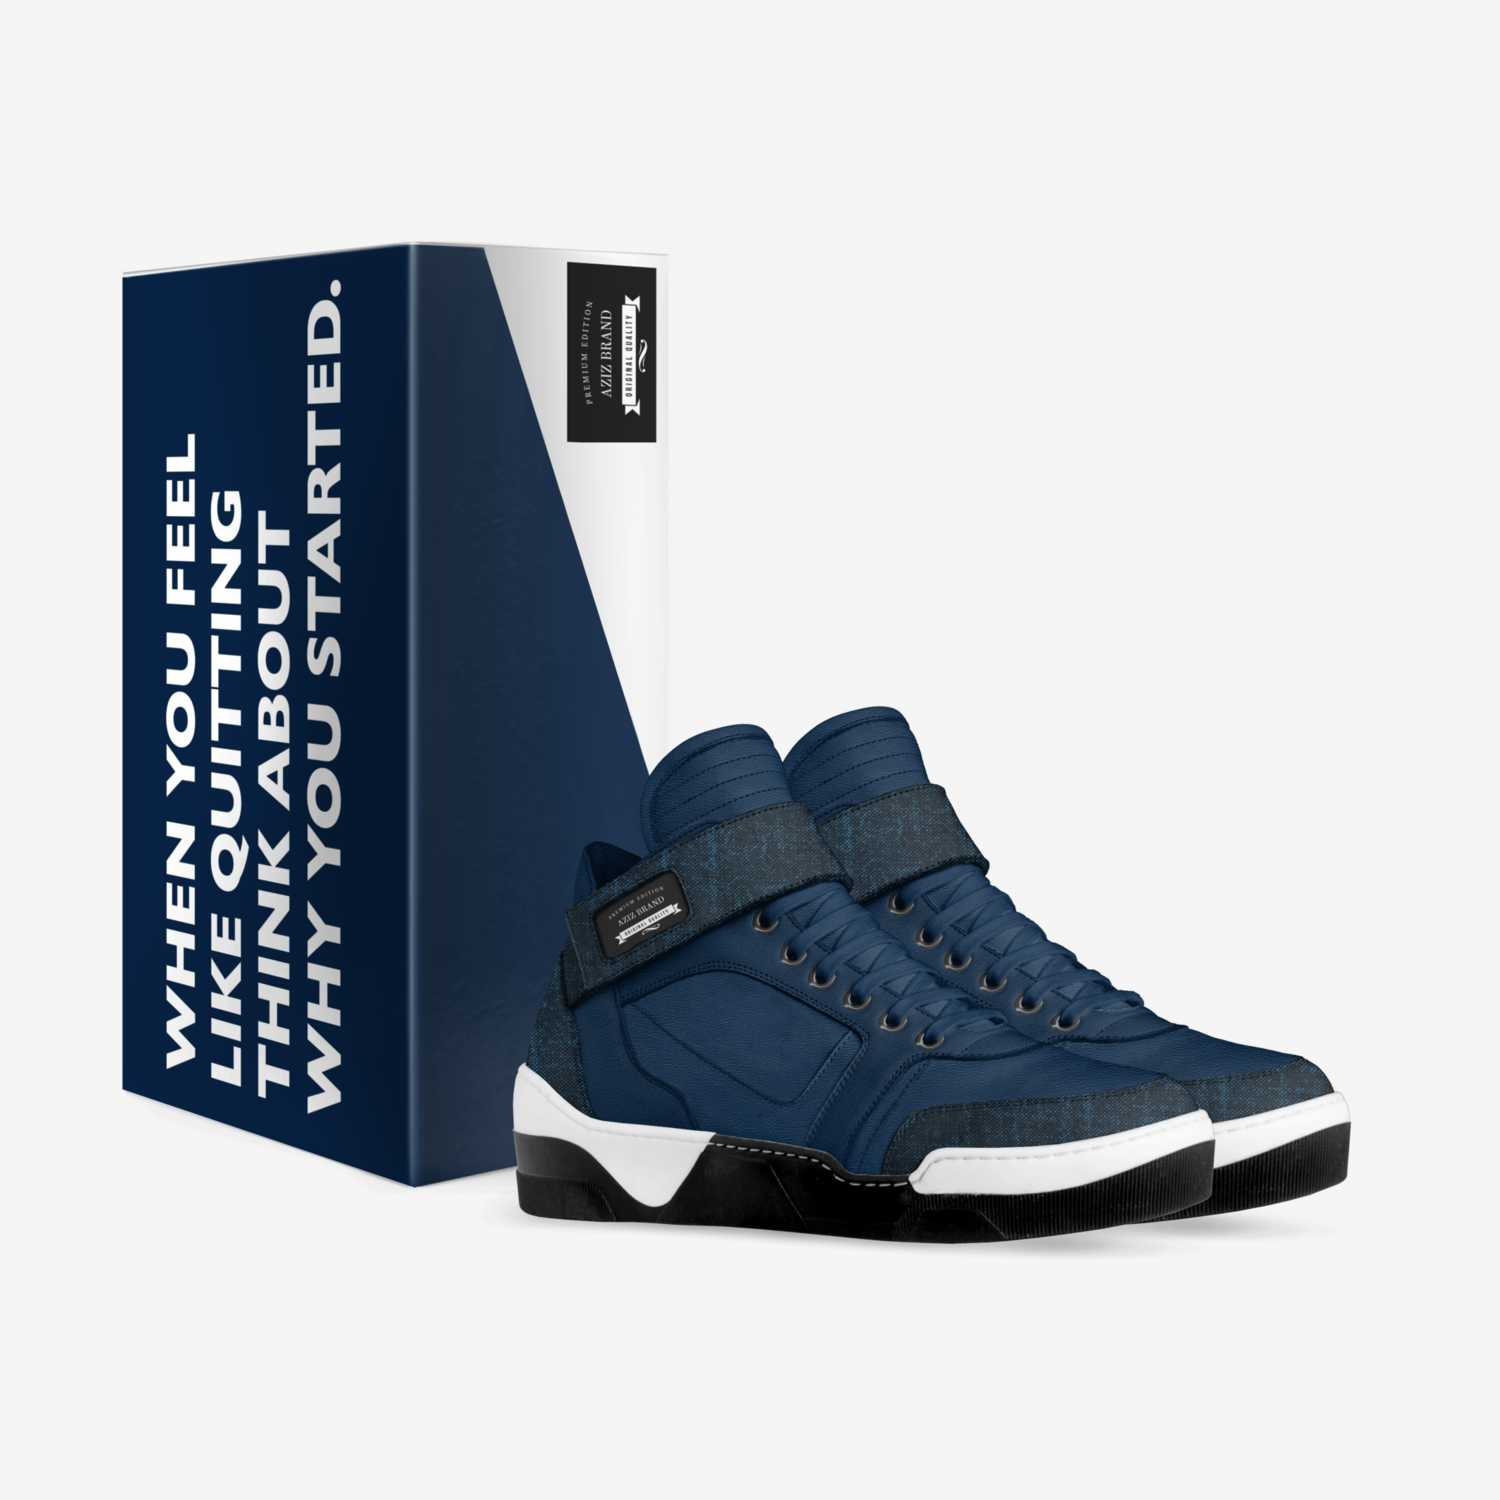 Aziz X 1s Blue custom made in Italy shoes by Benquan Petty | Box view